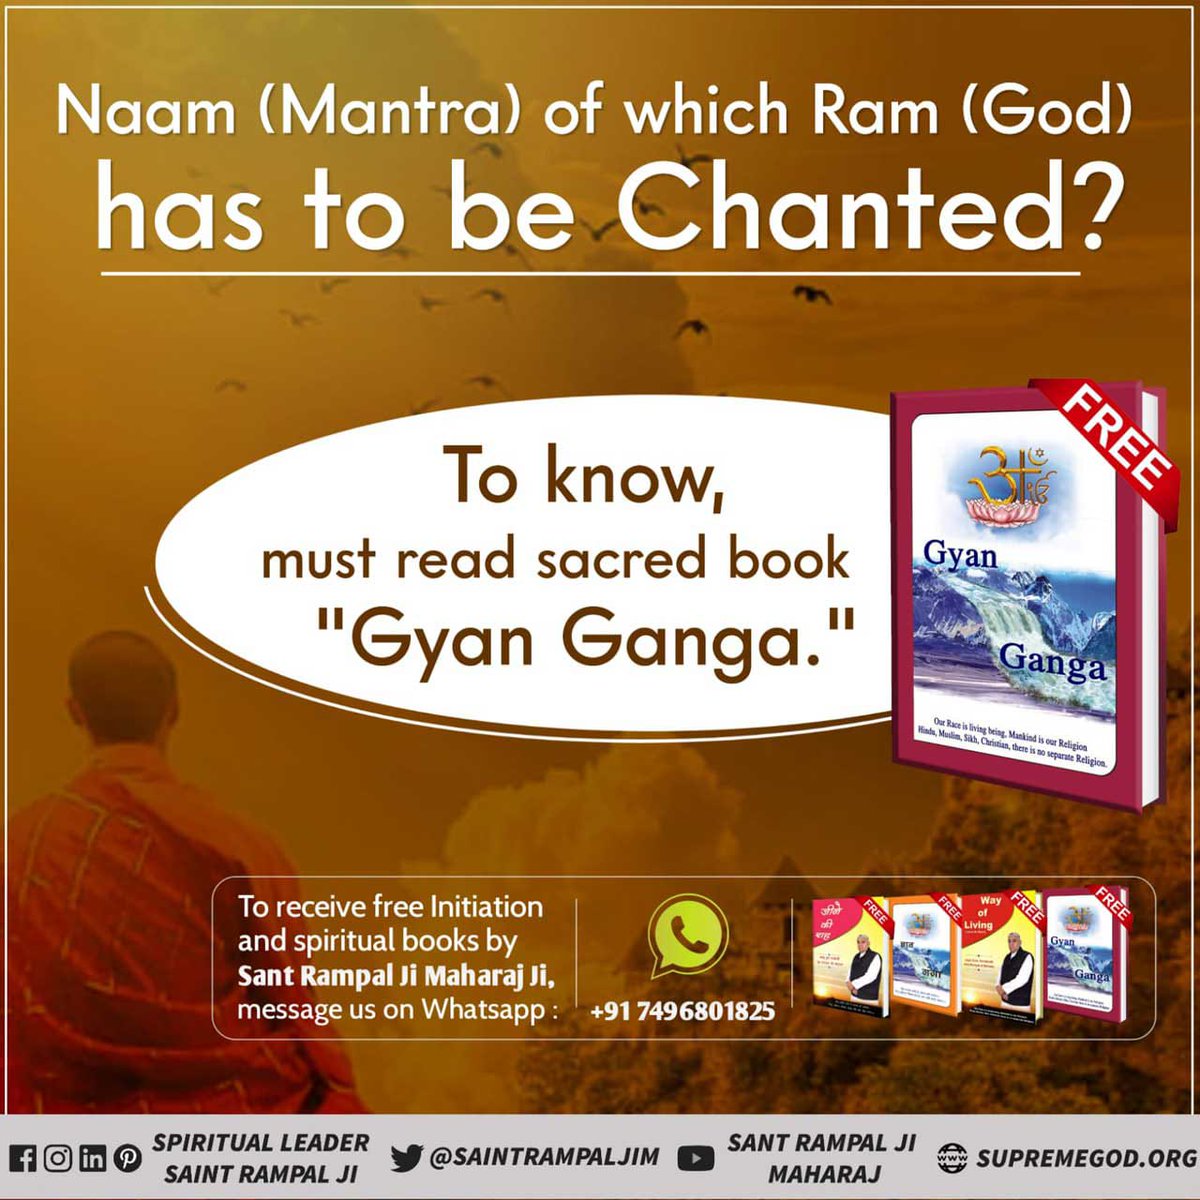 #GodNightWednesday
Naam (Mantra)
of which Ram (God)
has to be Chanted?
For More Information must read the previous book 'Gyan Ganga''
#wednesdaythought
#yourholybook